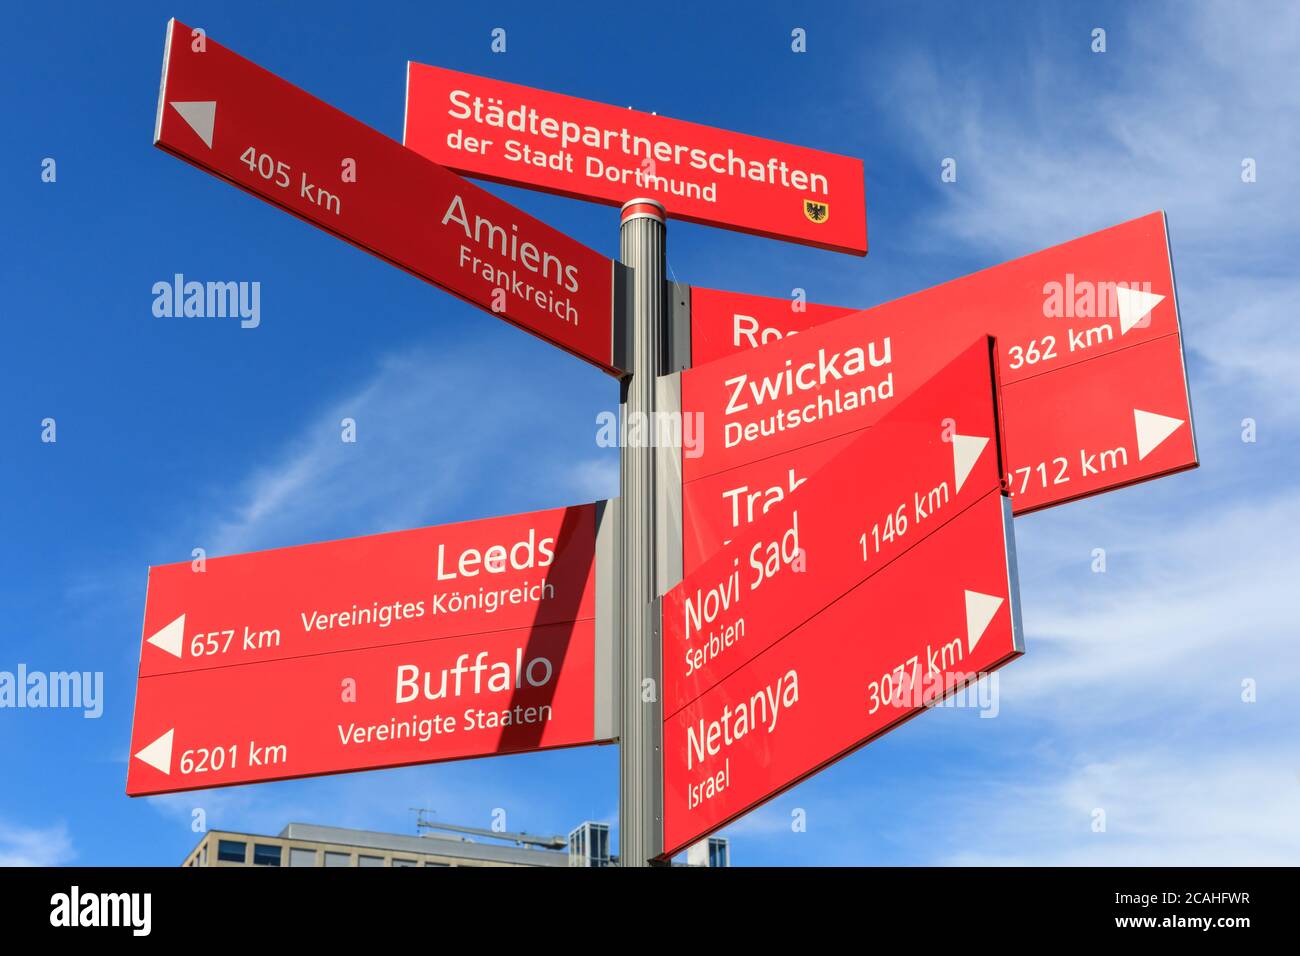 Dortmund twinned towns signs, direction and distance to partner cities in Dortmund, Germany Stock Photo